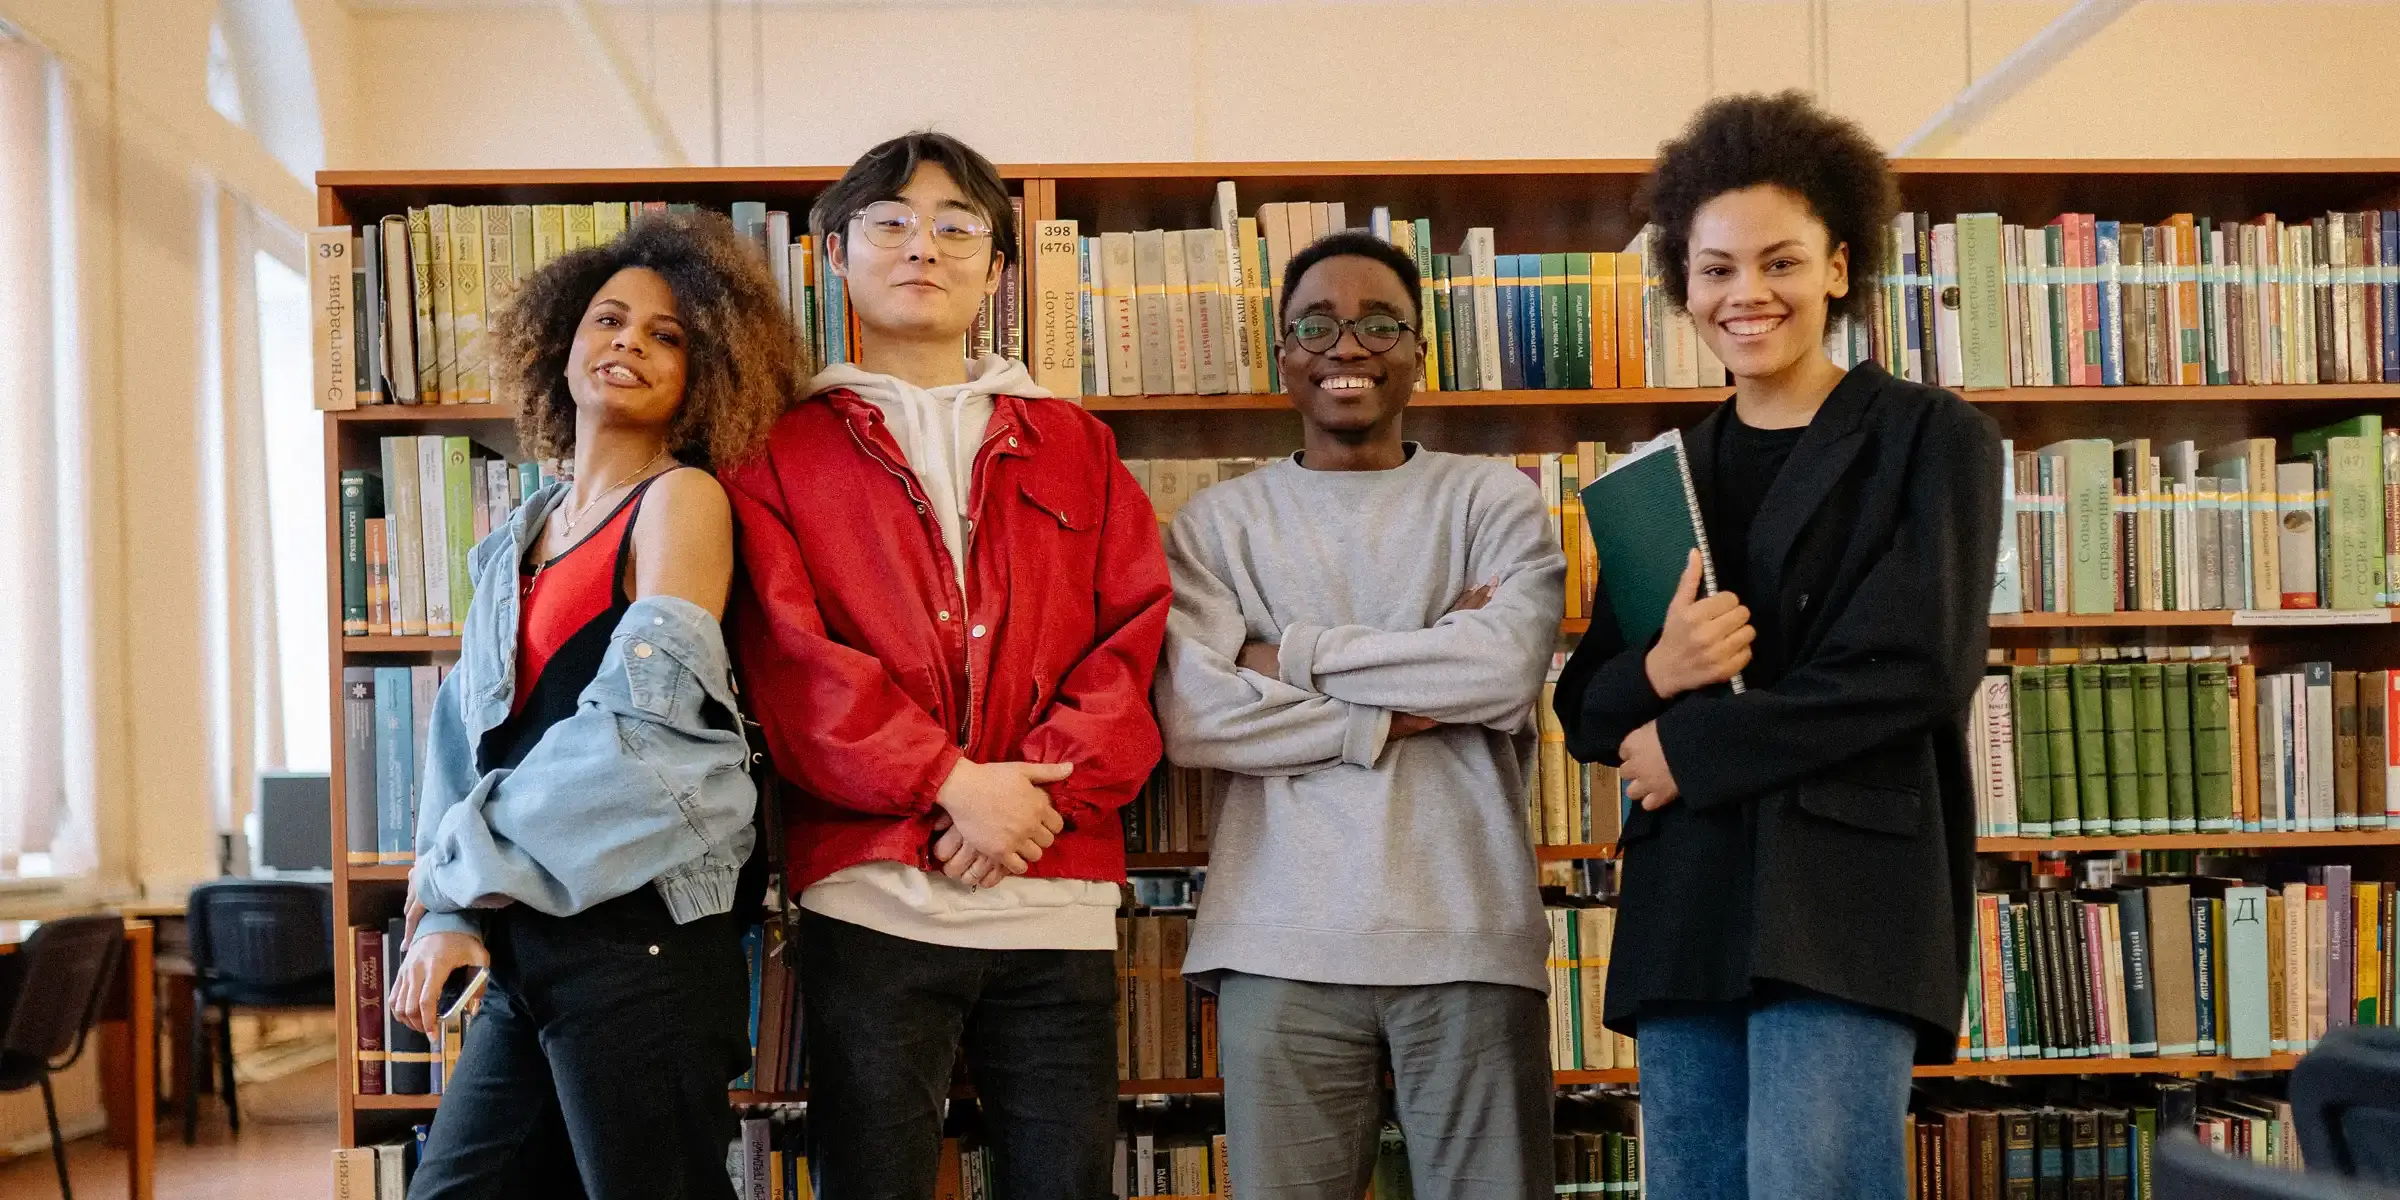 Students standing in front of book shelf in library